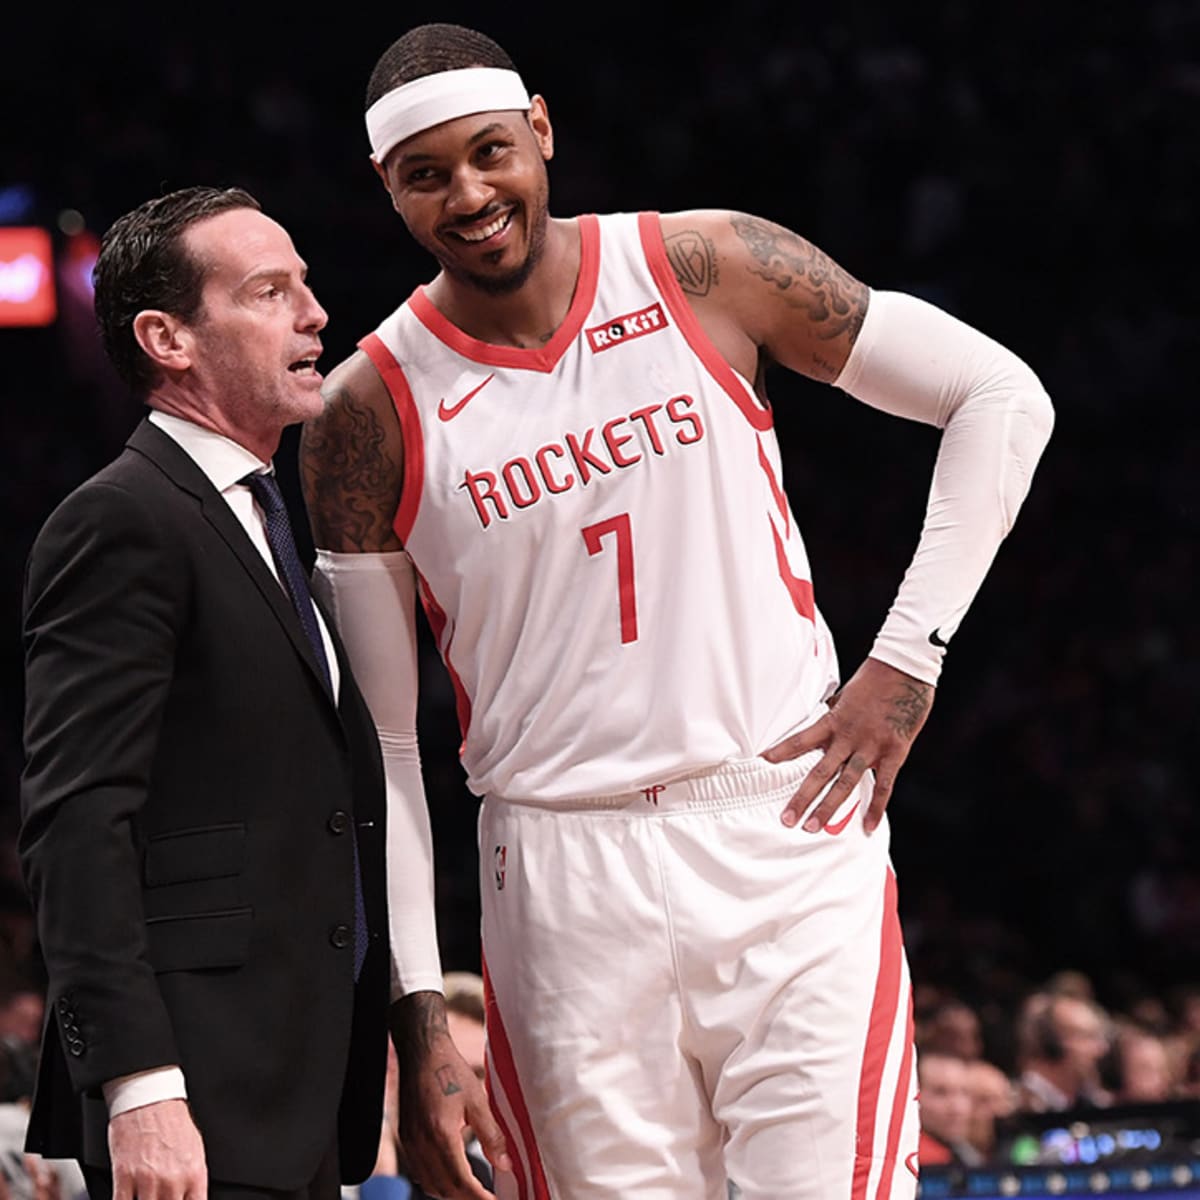 Houston Rockets 'Parting Ways' With Carmelo Anthony - The New York Times